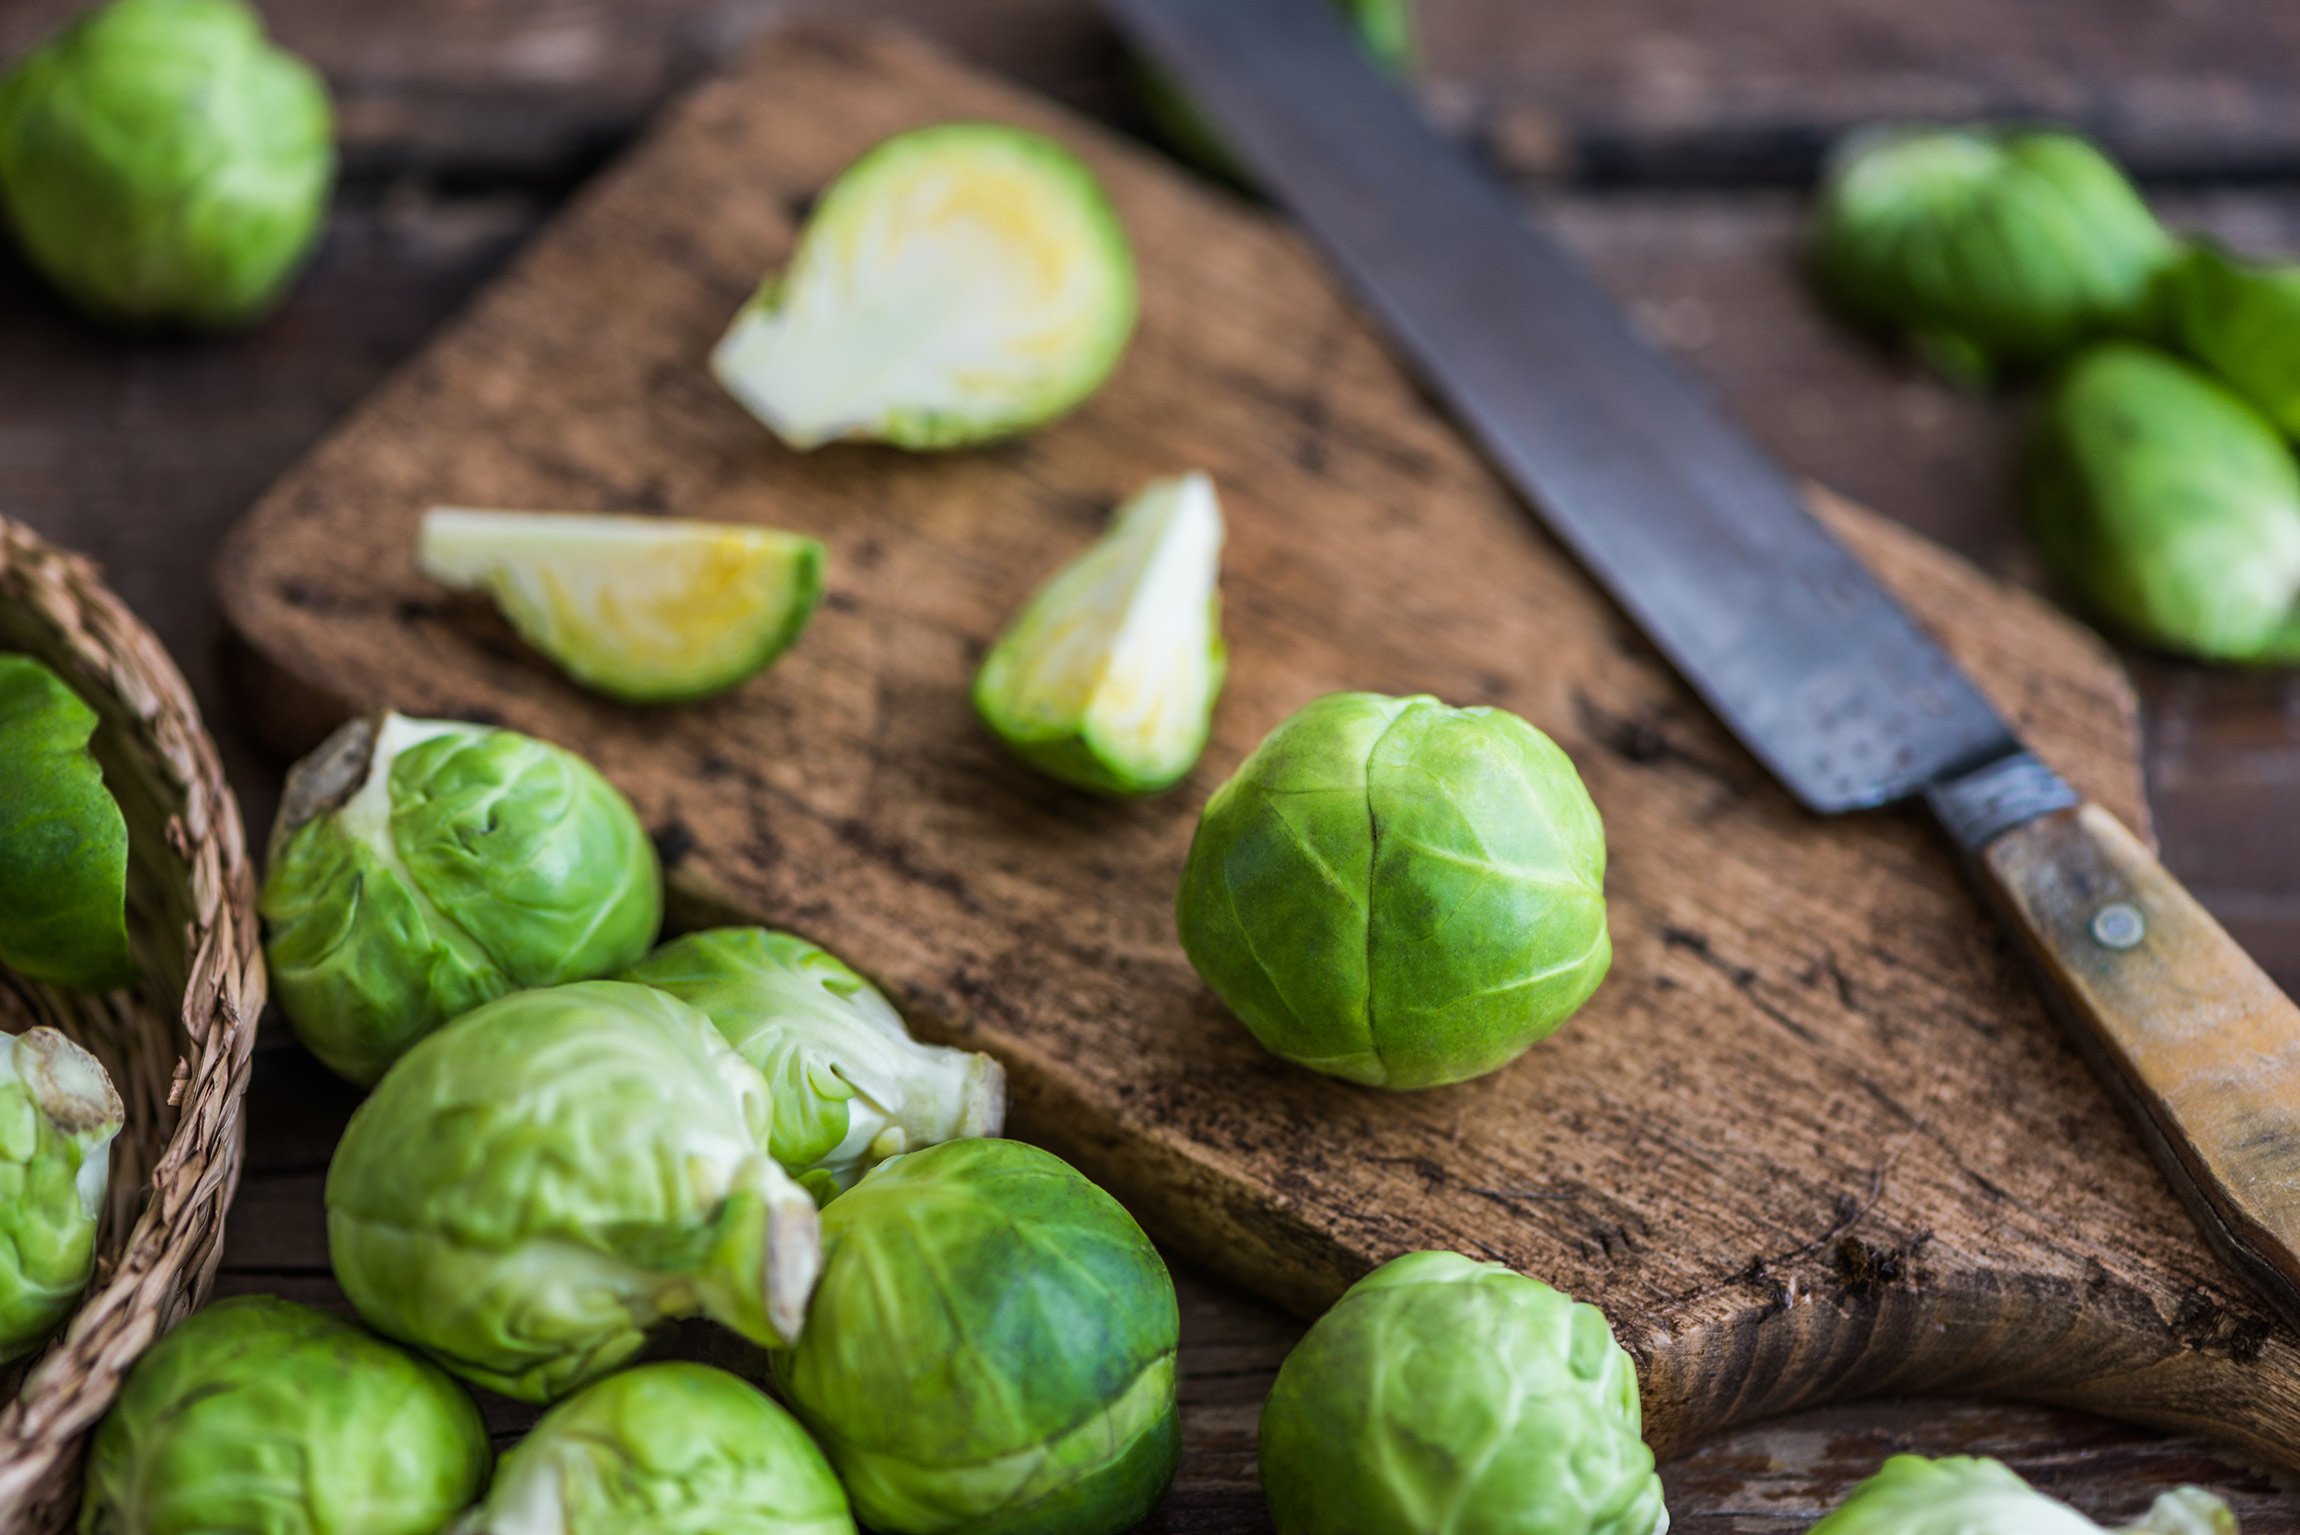 Fall fruits and vegetables: what's in season? Brussels sprouts